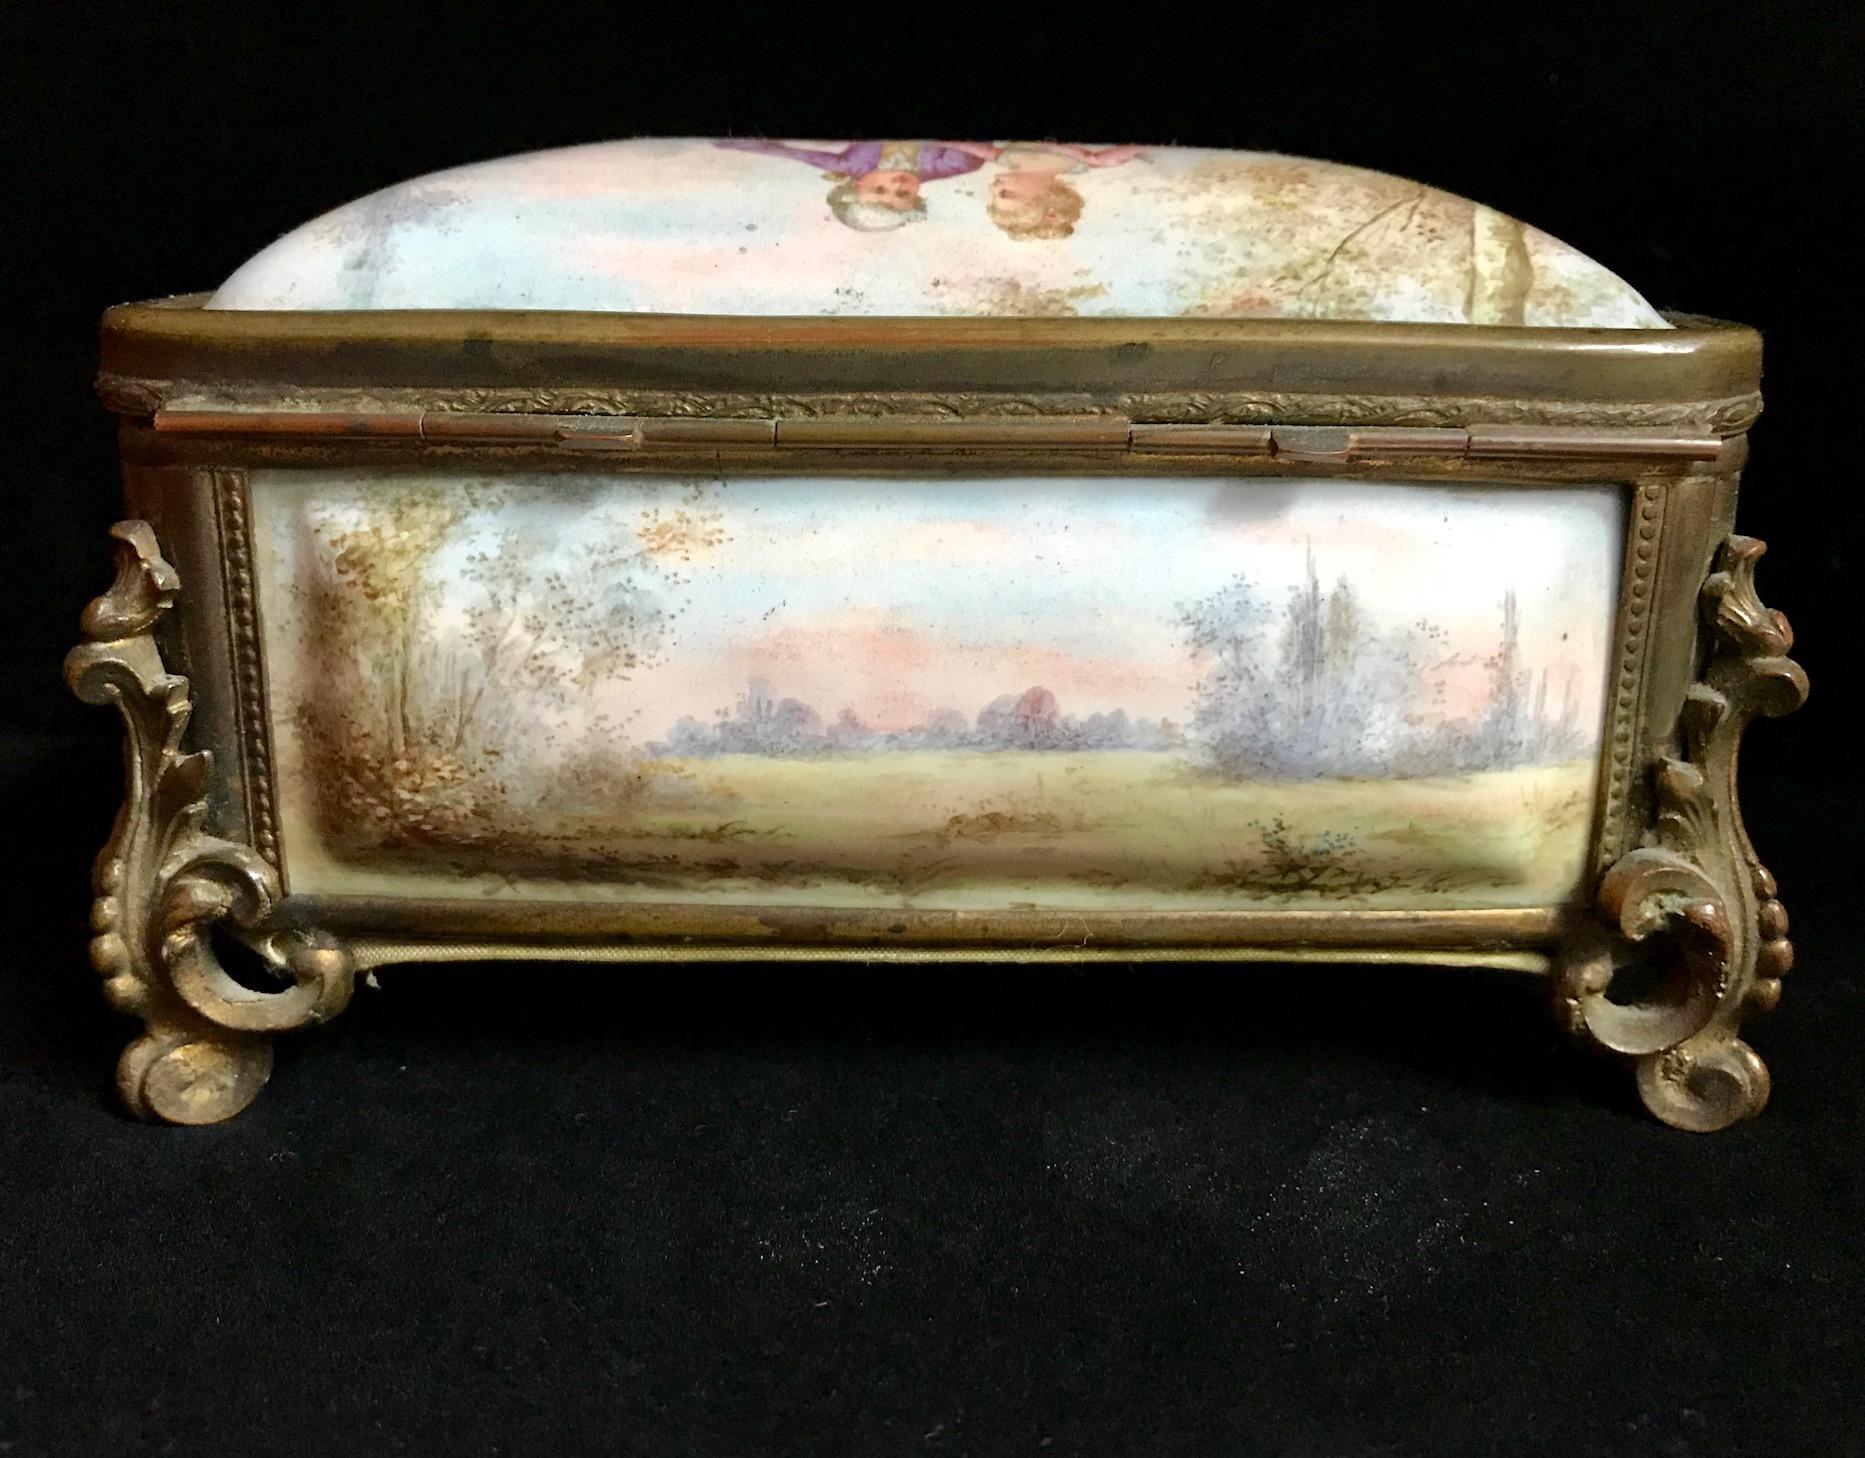 19th Century French Polychrome Enamel and Bronze Jewelry Box Casket For Sale 2